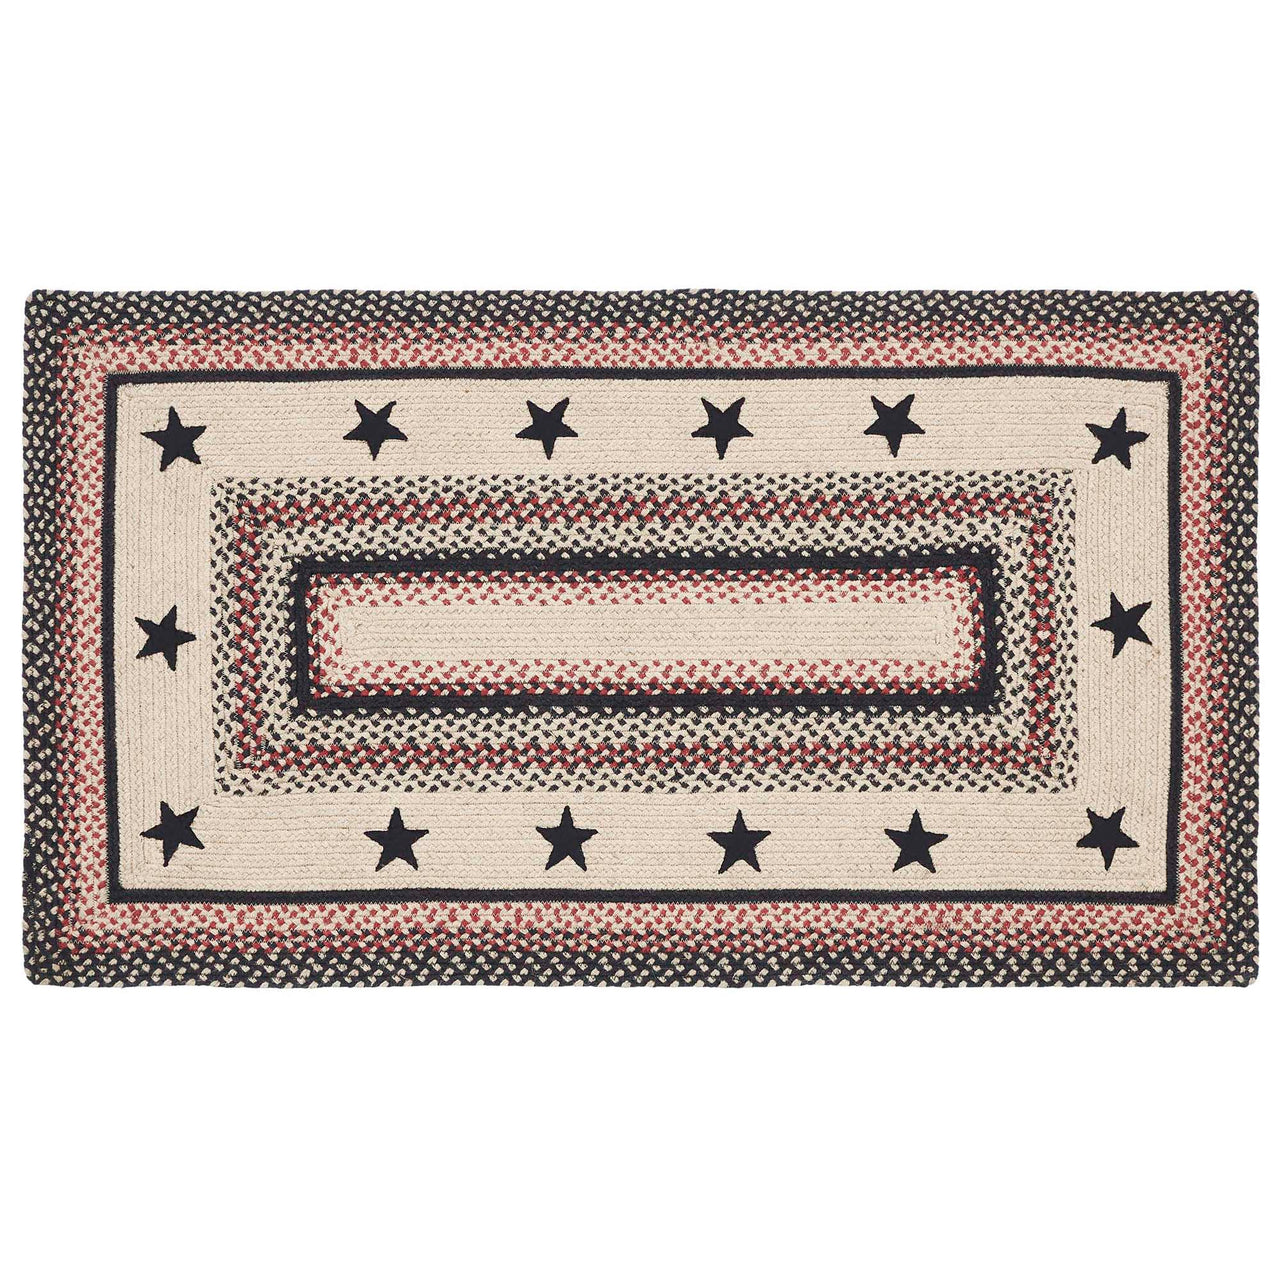 Colonial Star Jute Braided Rug Rect with Rug Pad 27"x48" VHC Brands